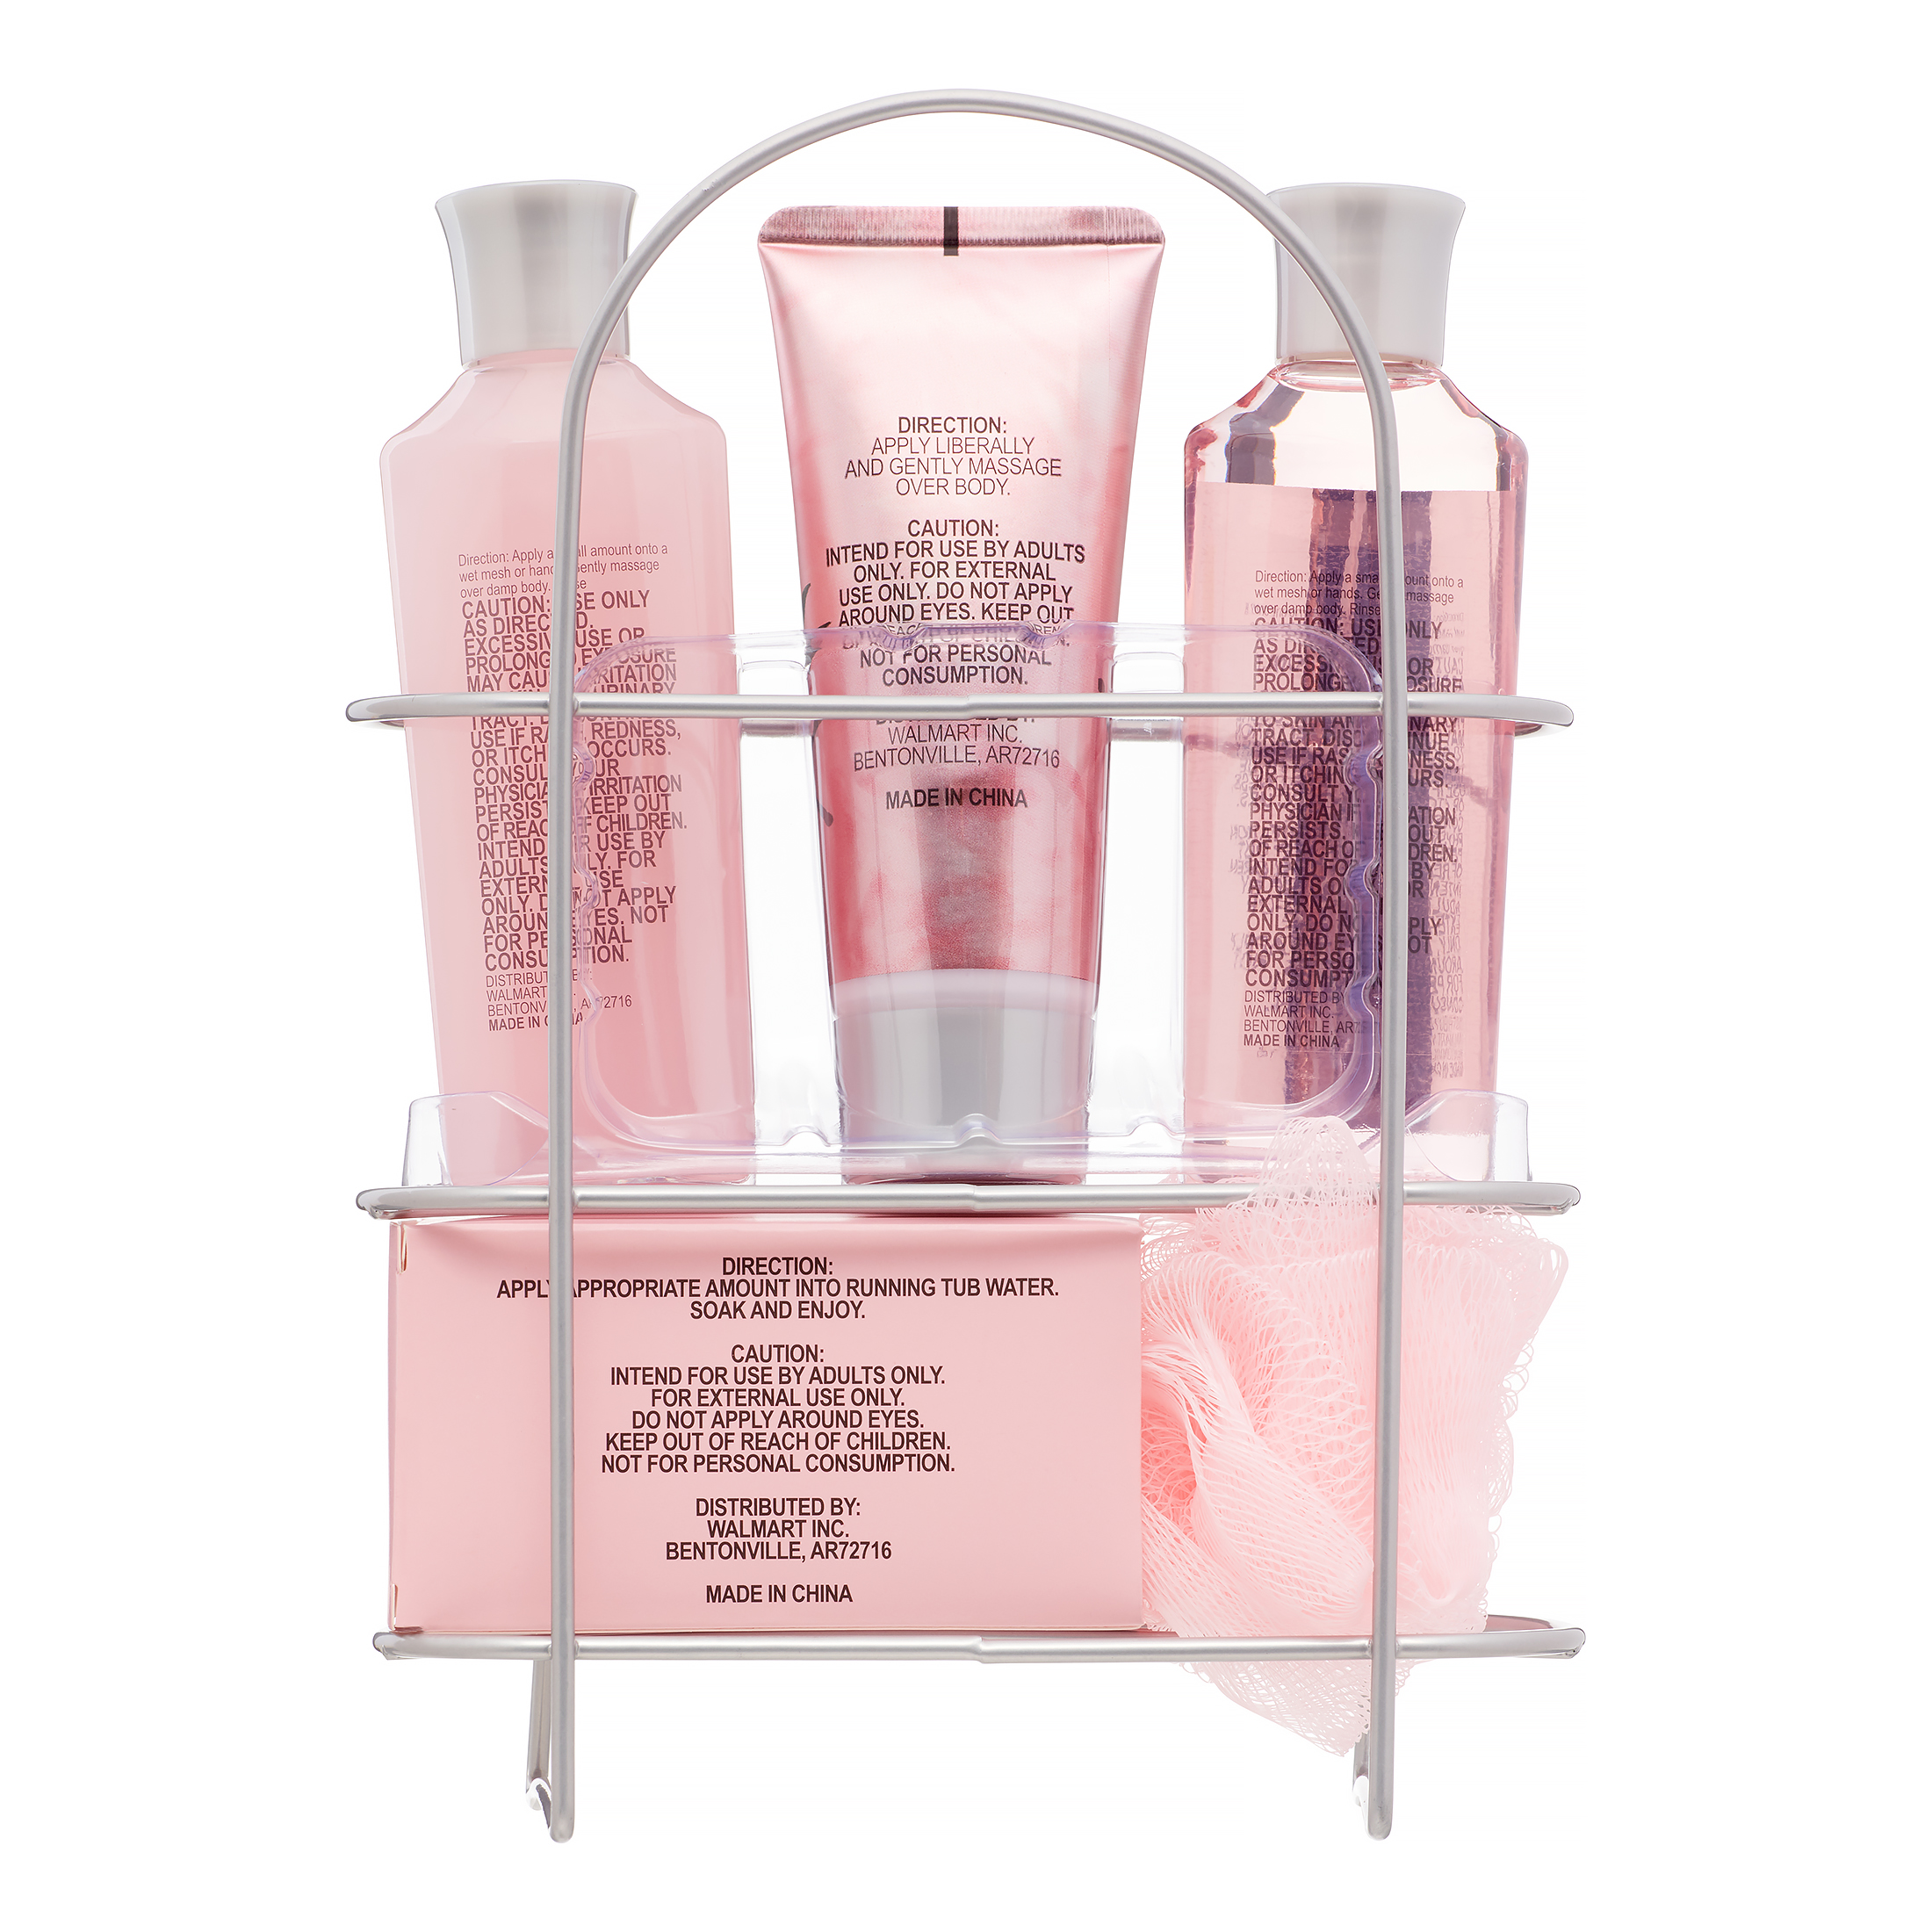 Floral Breeze 6-Piece Lovely Blossoms Bath and Body Gift Set with Shower Caddy - image 4 of 7